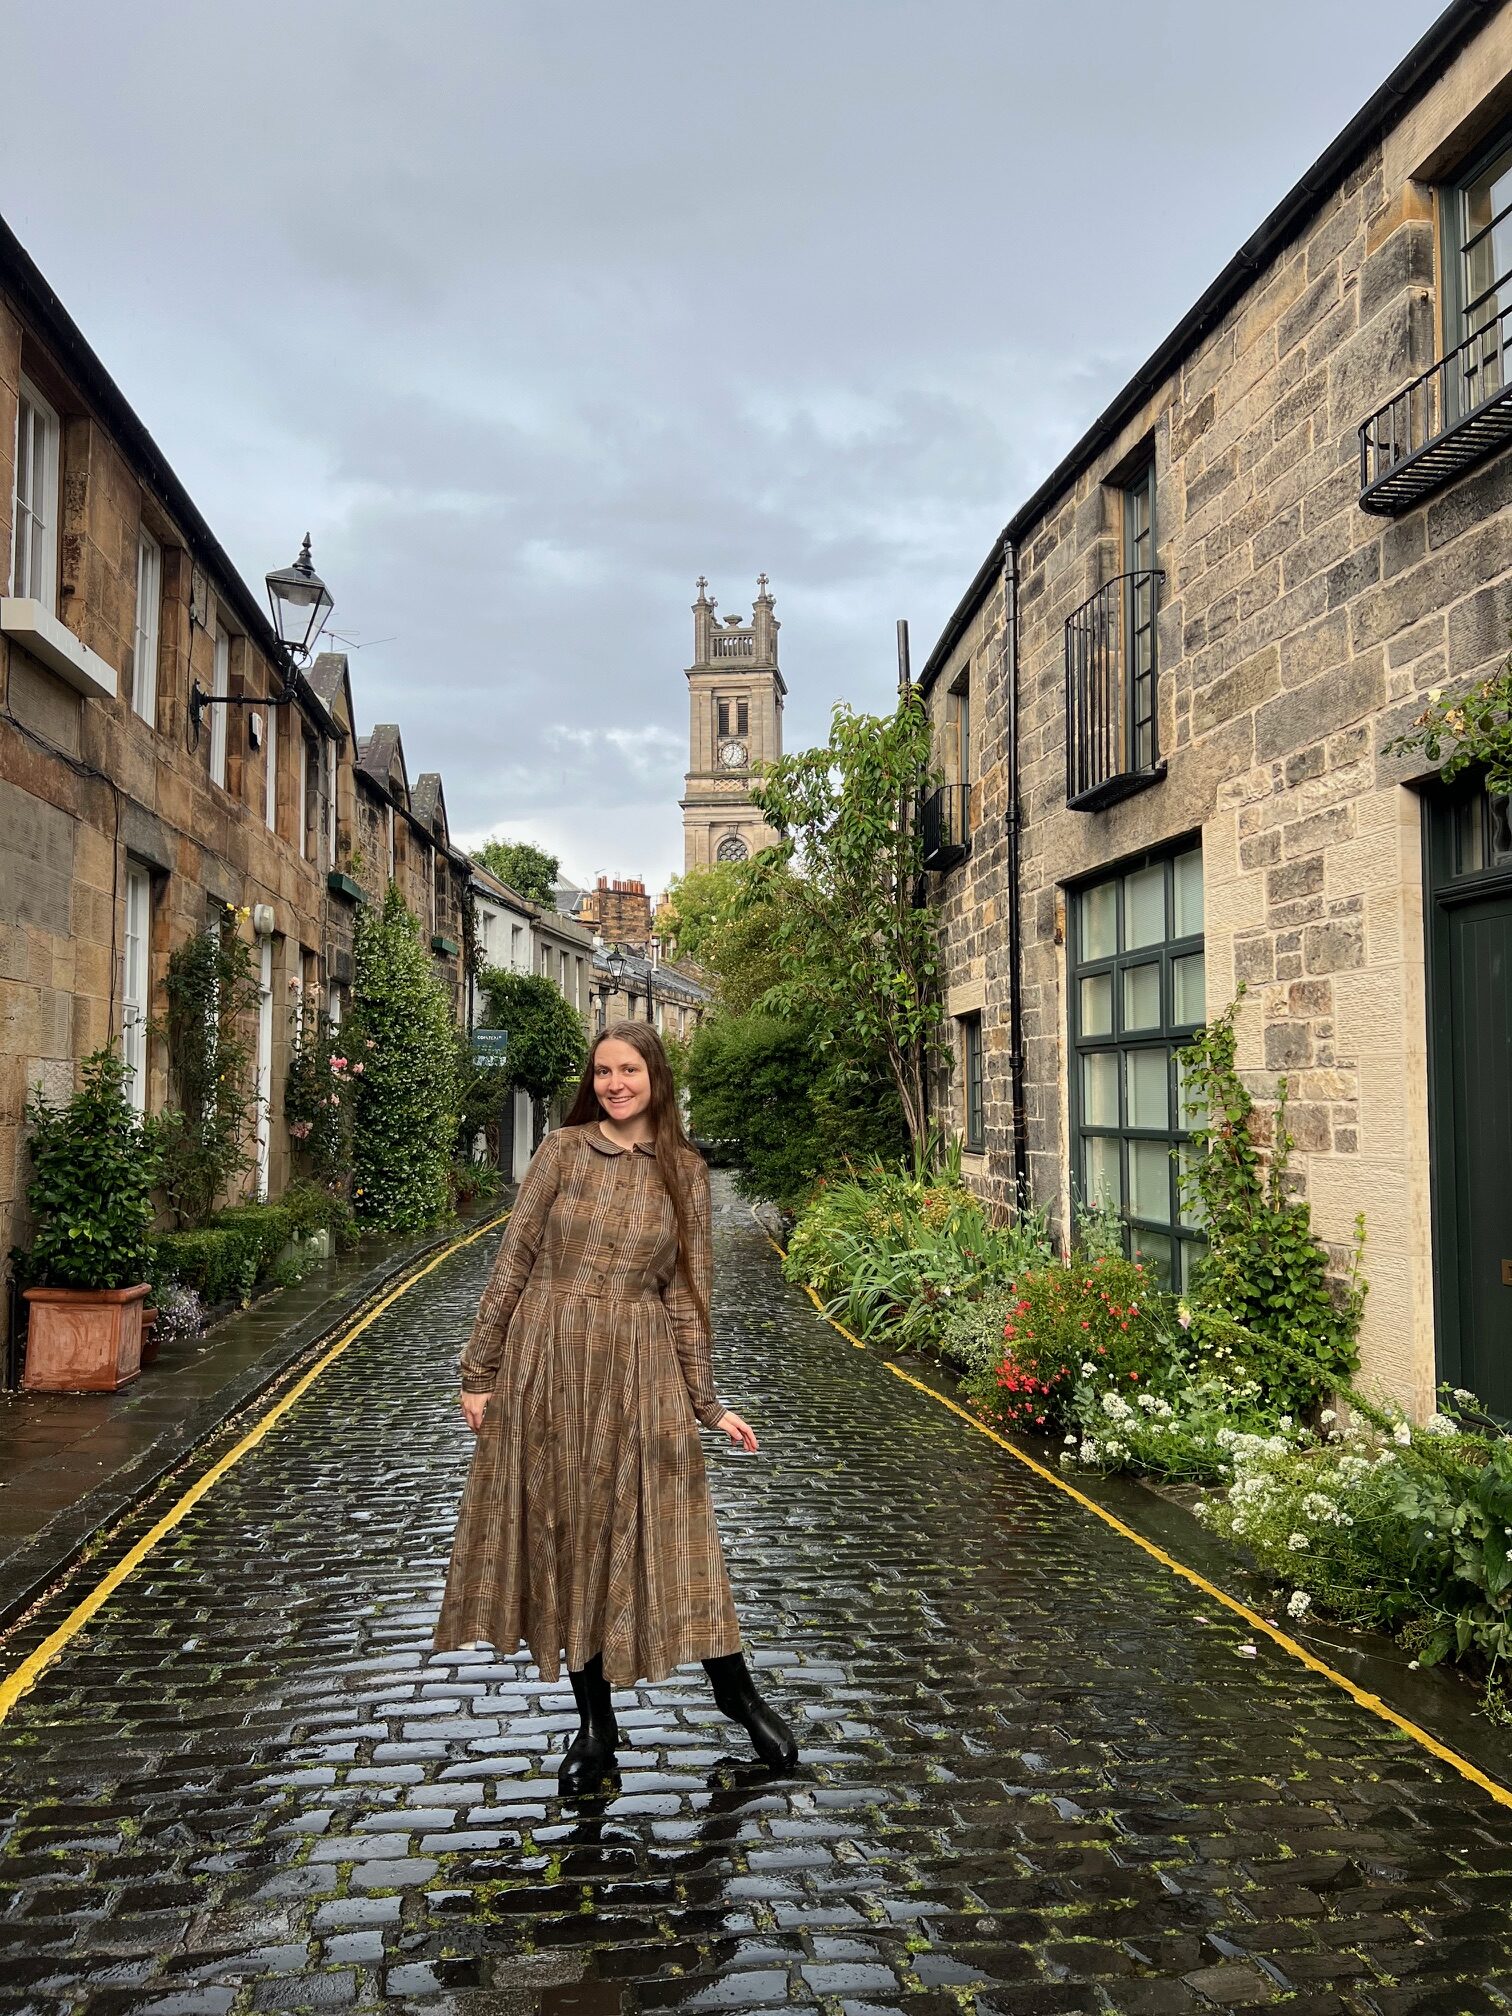 a girl in a brown dress standing in front of circus lane  with cobblestone and stone buildings